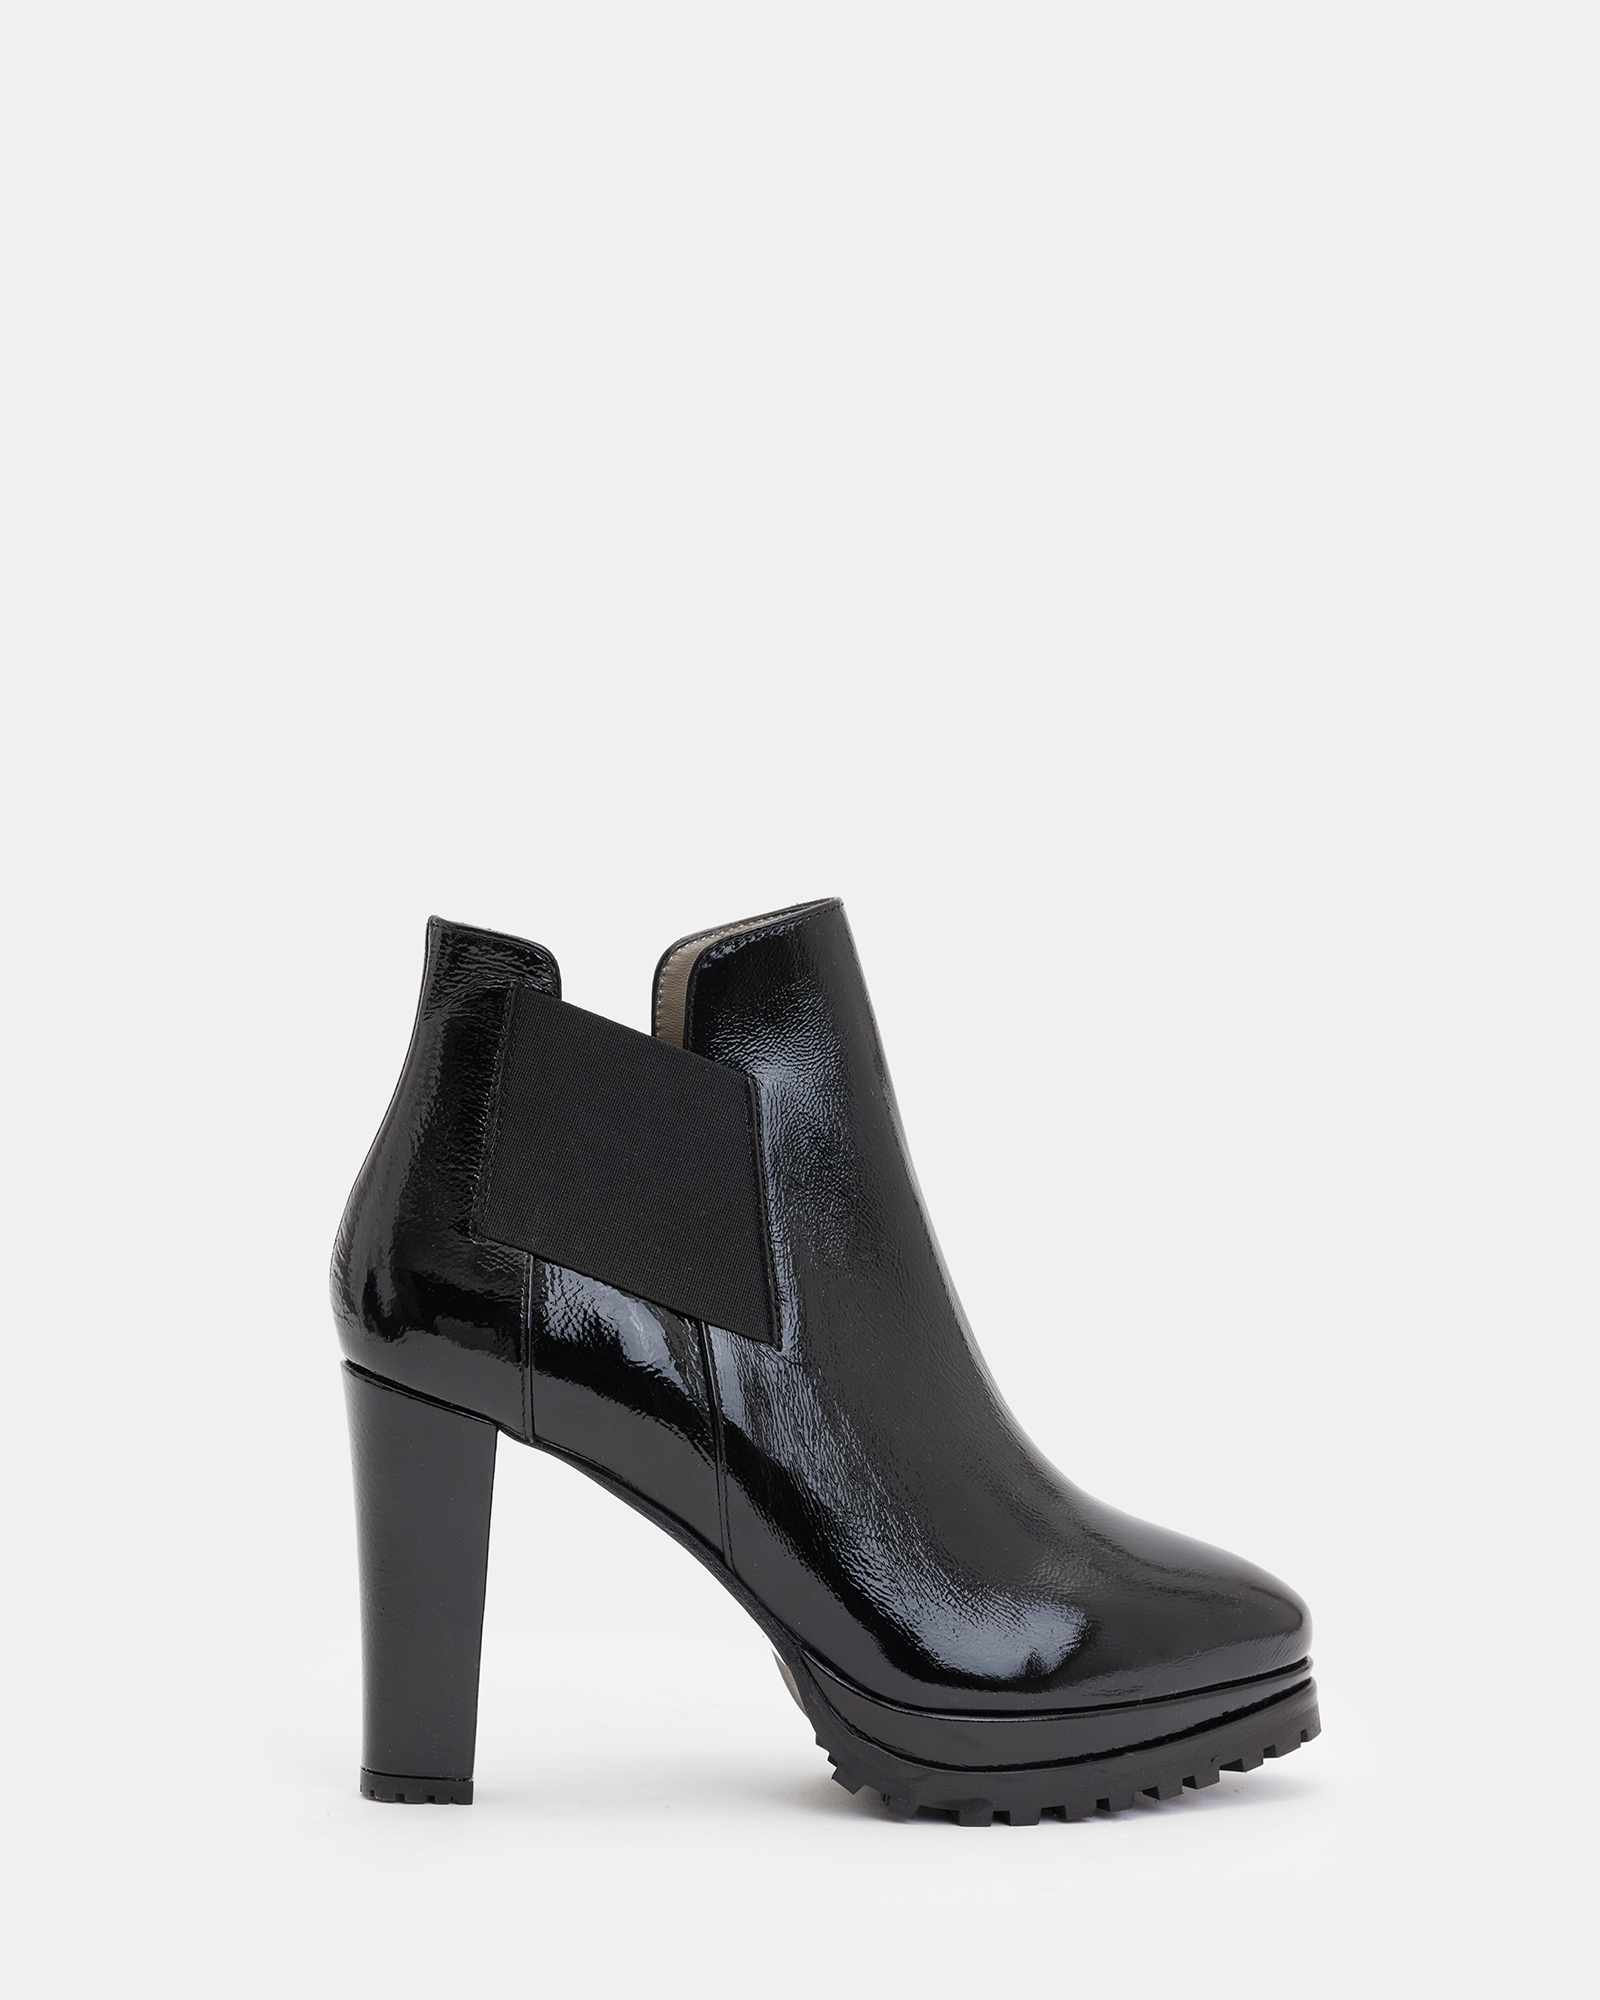 Allsaints Sarris Patent Leather Boots In Black